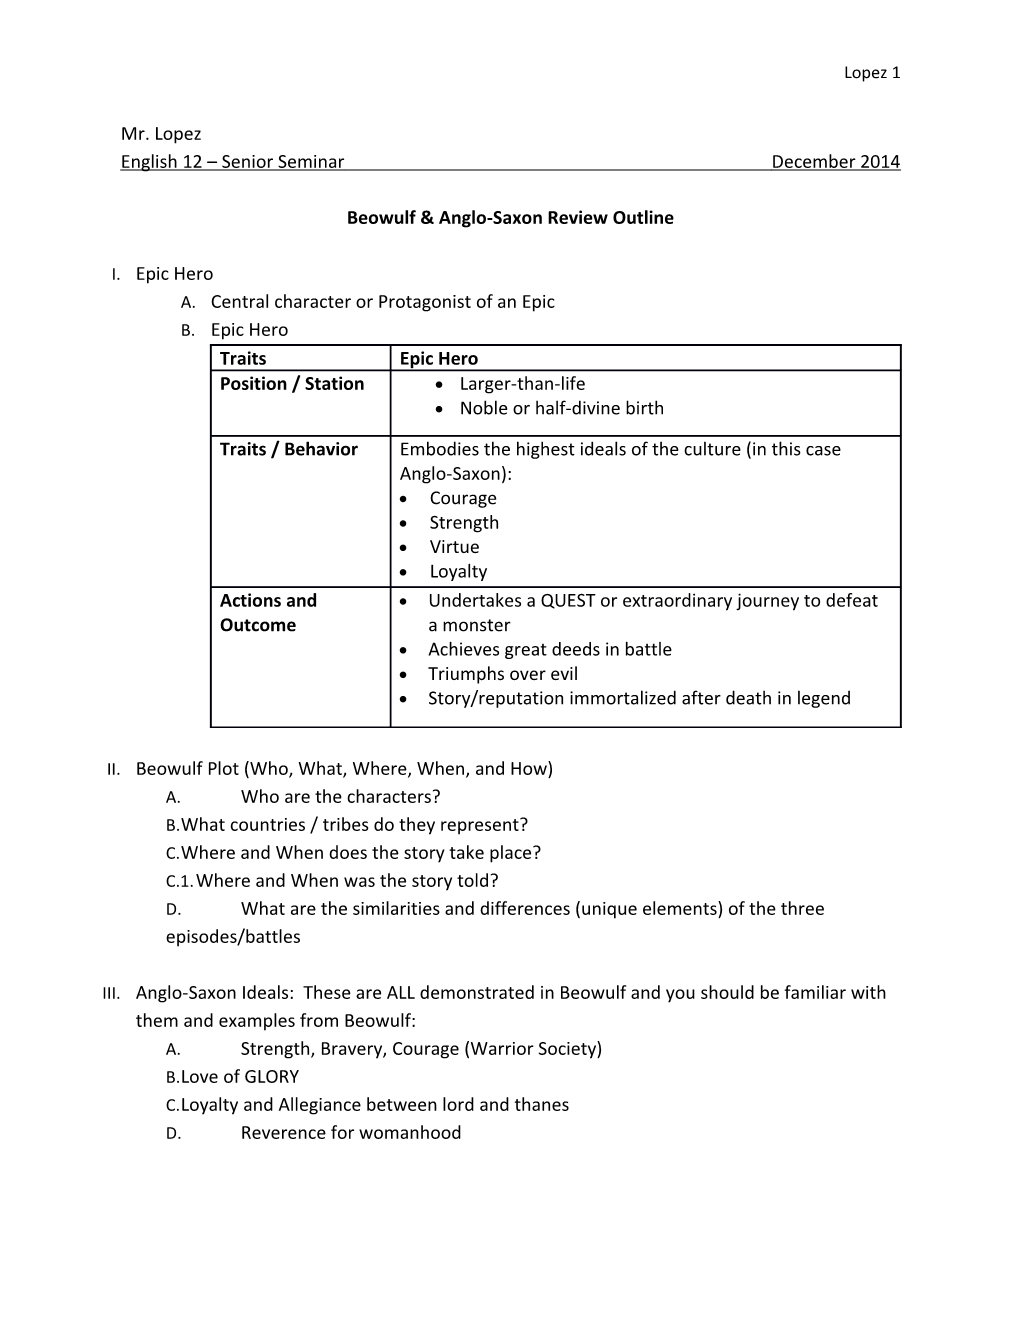 Beowulf & Anglo-Saxon Review Outline